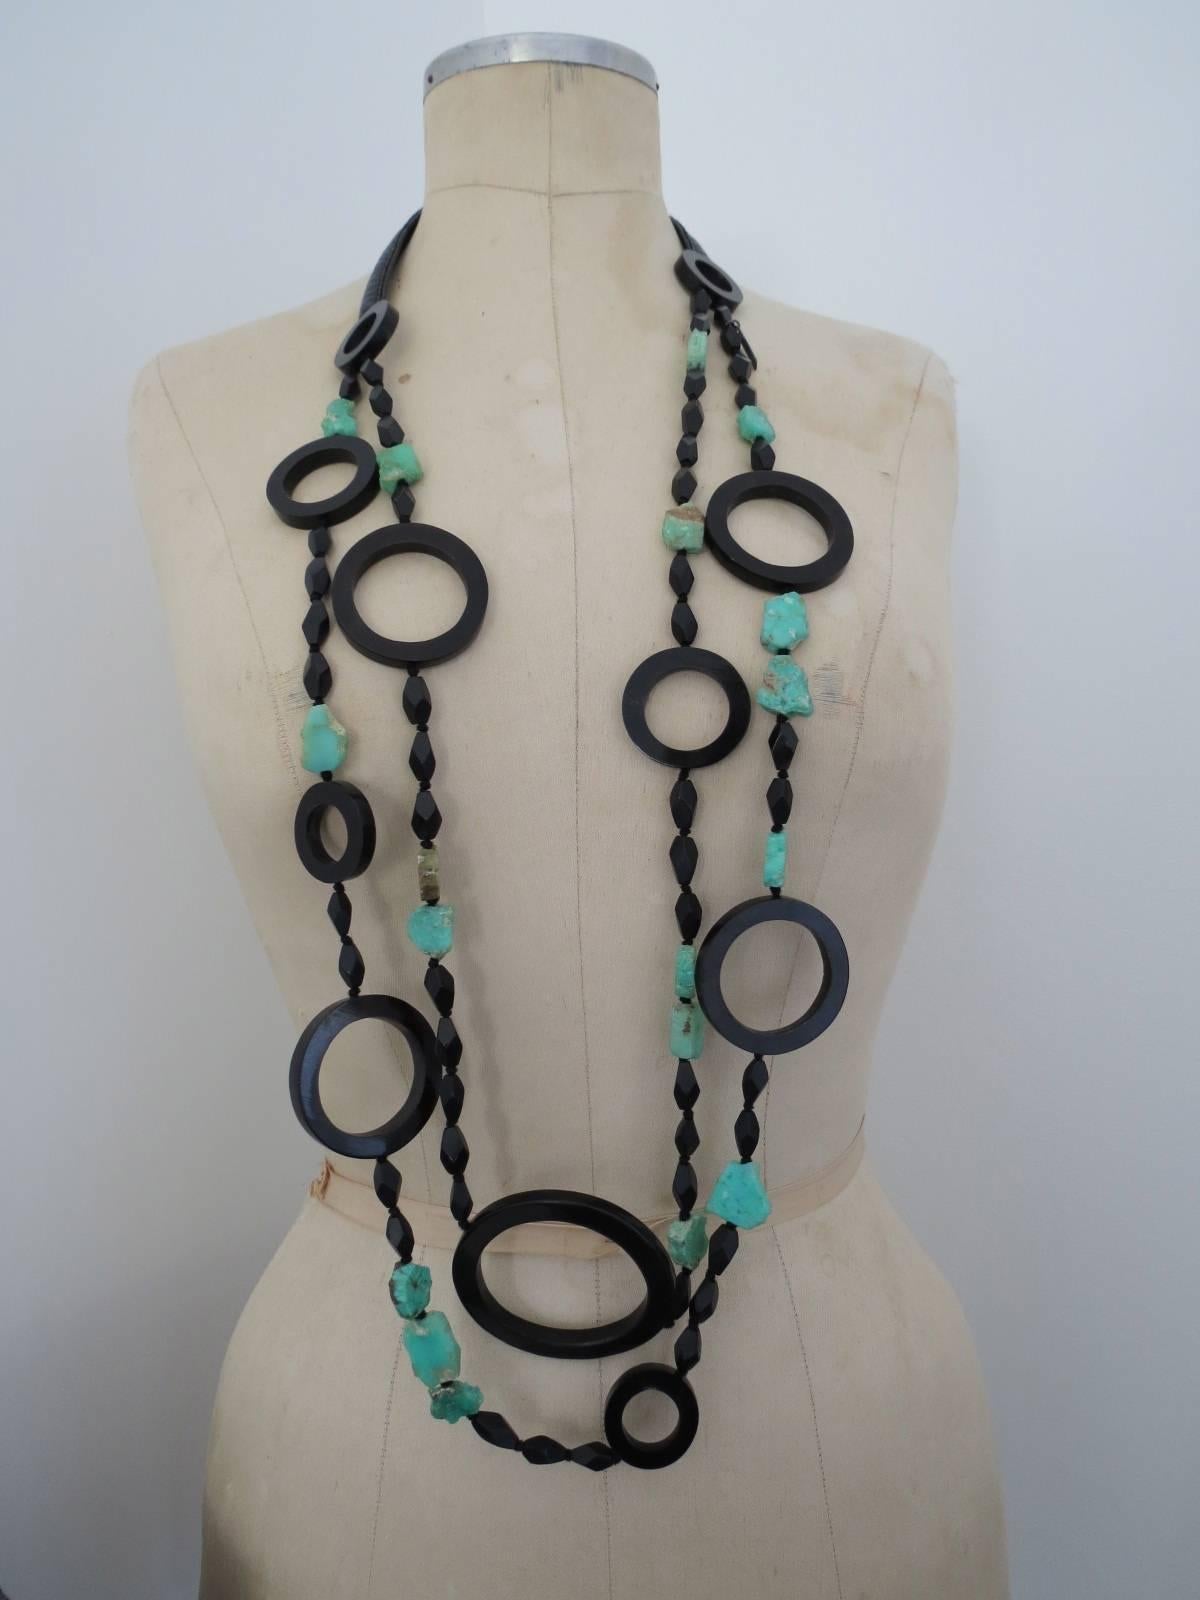 This is lovely Danish Monies bovine horn turquoise necklace designed by Gerda Lynggaard . The necklace is signed and labelled.
Item Specifics
Length: 120cm (approx 47.00